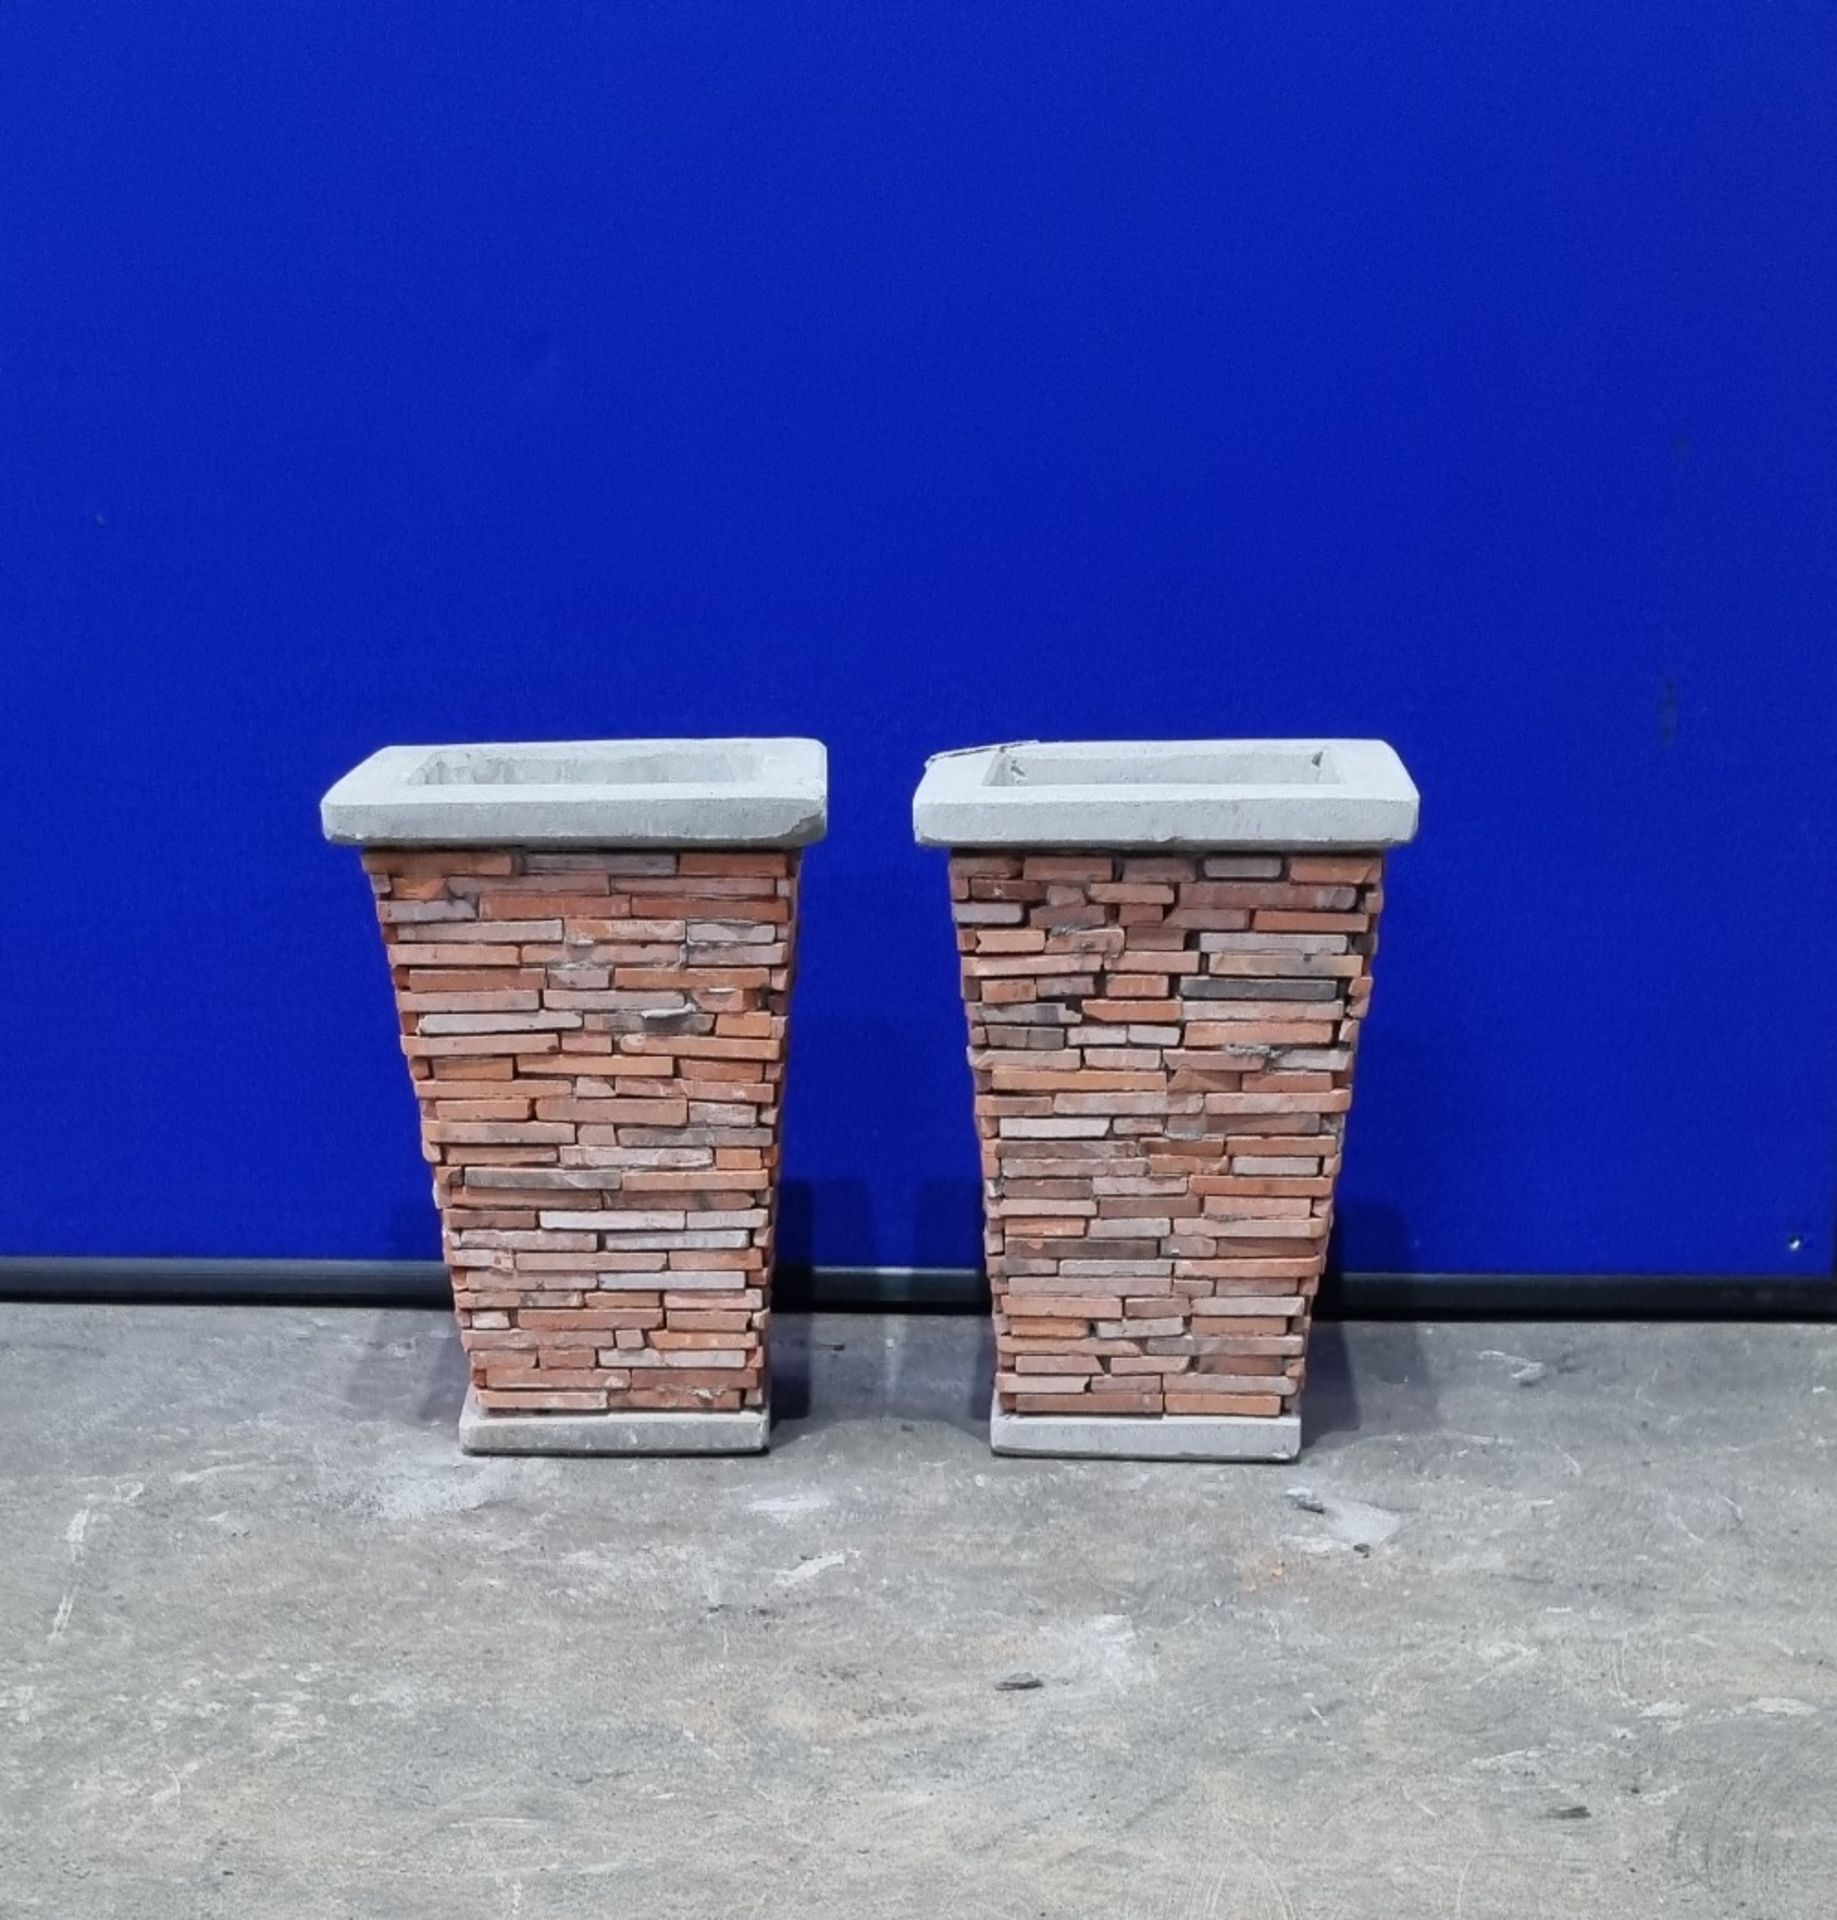 2 x Mims Artisan Vintage Brick Collection 45093-S3 Planters | RRP £19.99 each | One Pot Damaged "See